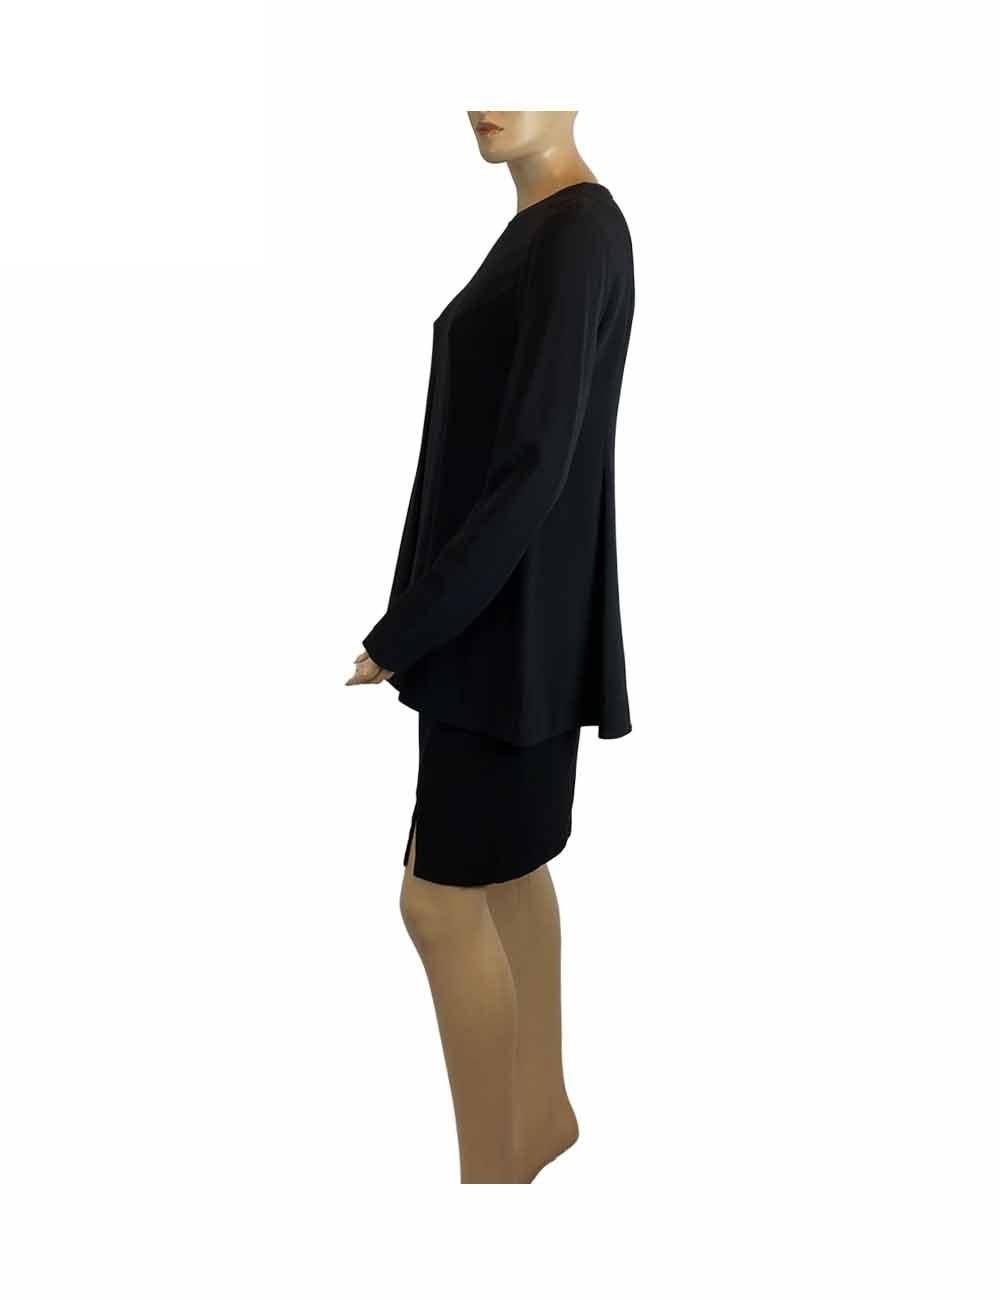 Black Stella McCartney long sleeve peplum pleated top. 

Additional information:
Material: Viscose, Acetate and Elastane 
Size: IT 42  
Overall Condition: Excellent 